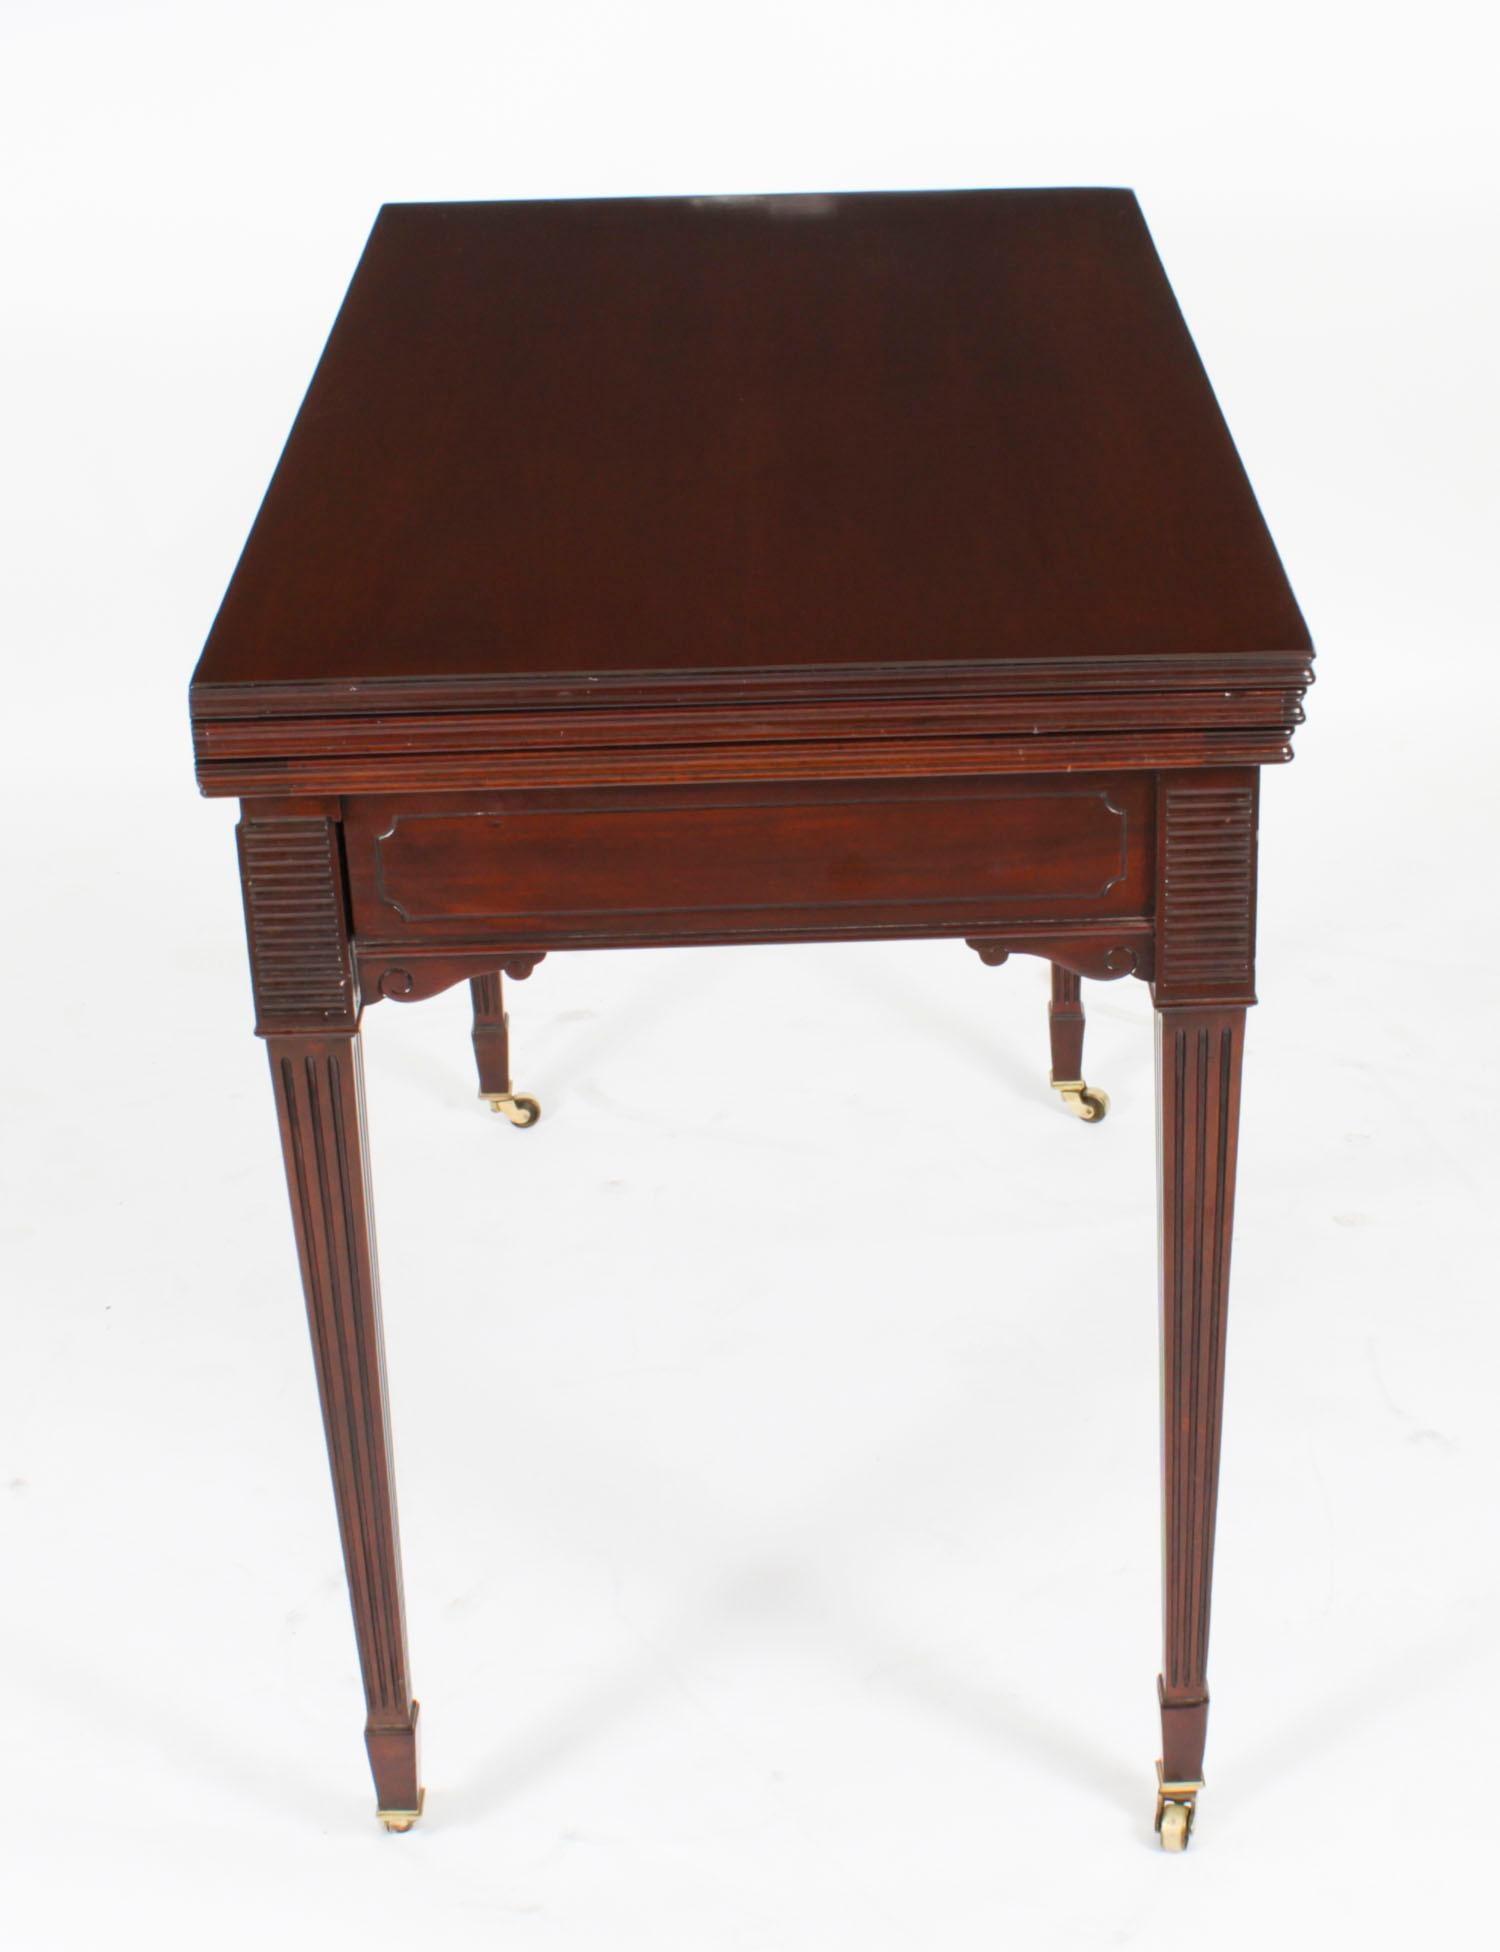 Antique Victorian Mahogany Games Card Roulette Table 19th Century For Sale 6